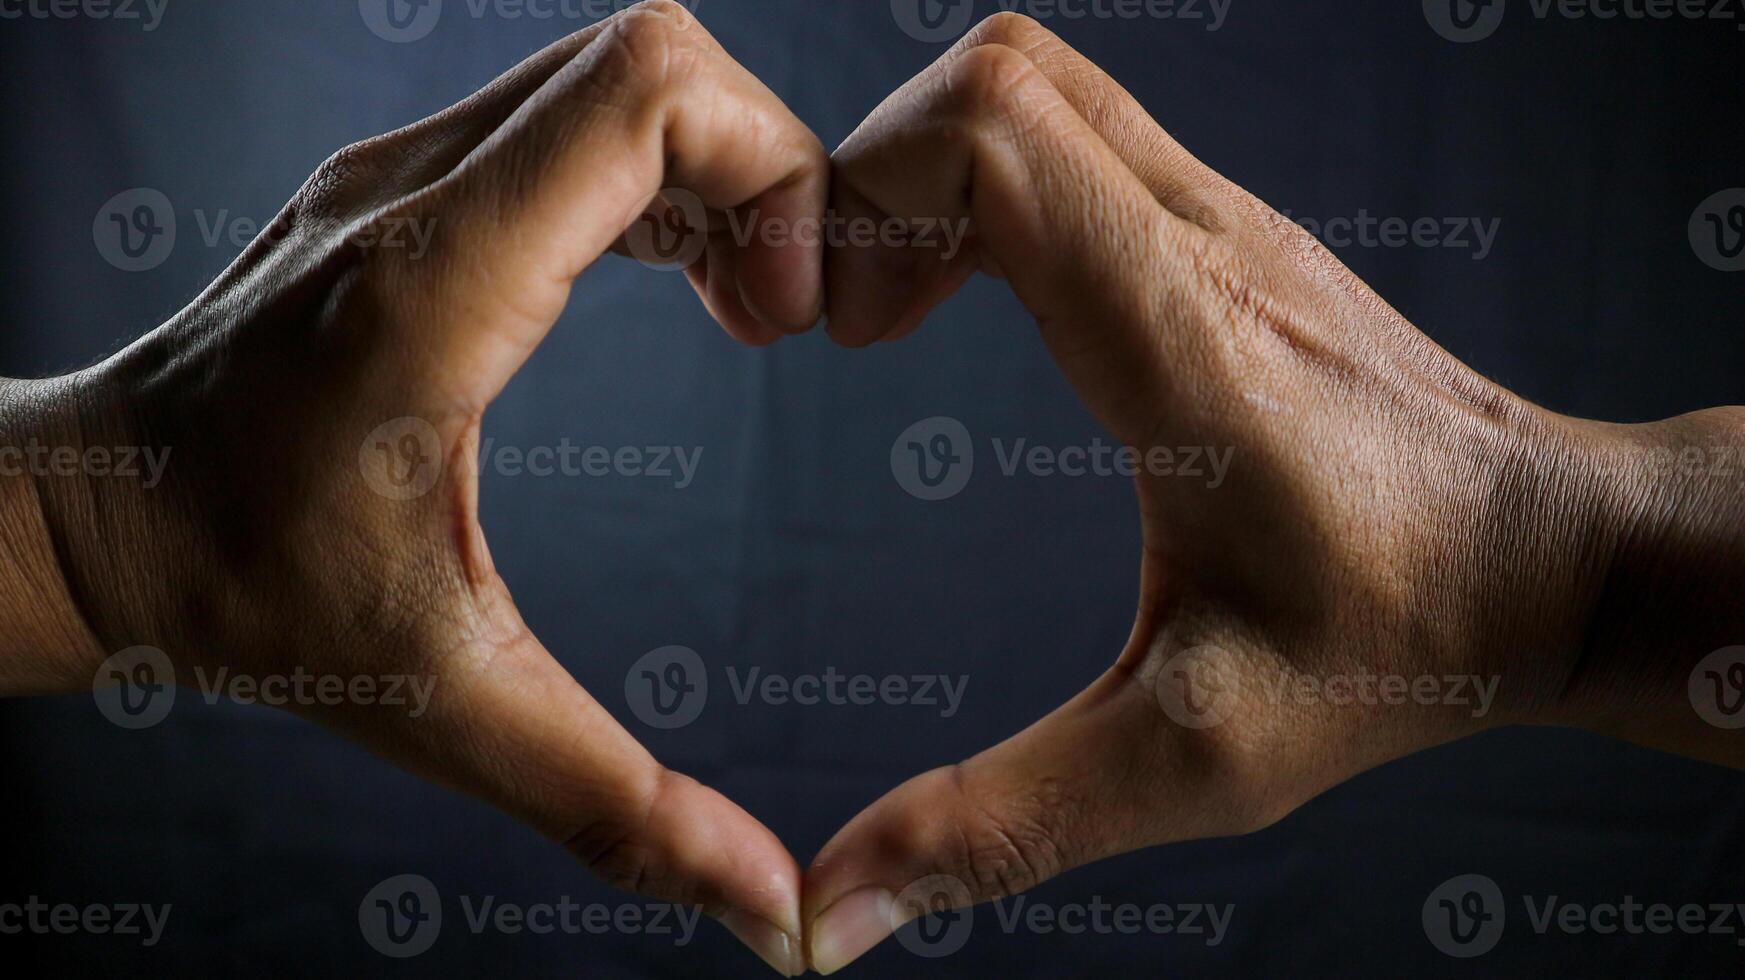 Hands in heart shape, interracial friendship isolated on black background. photo